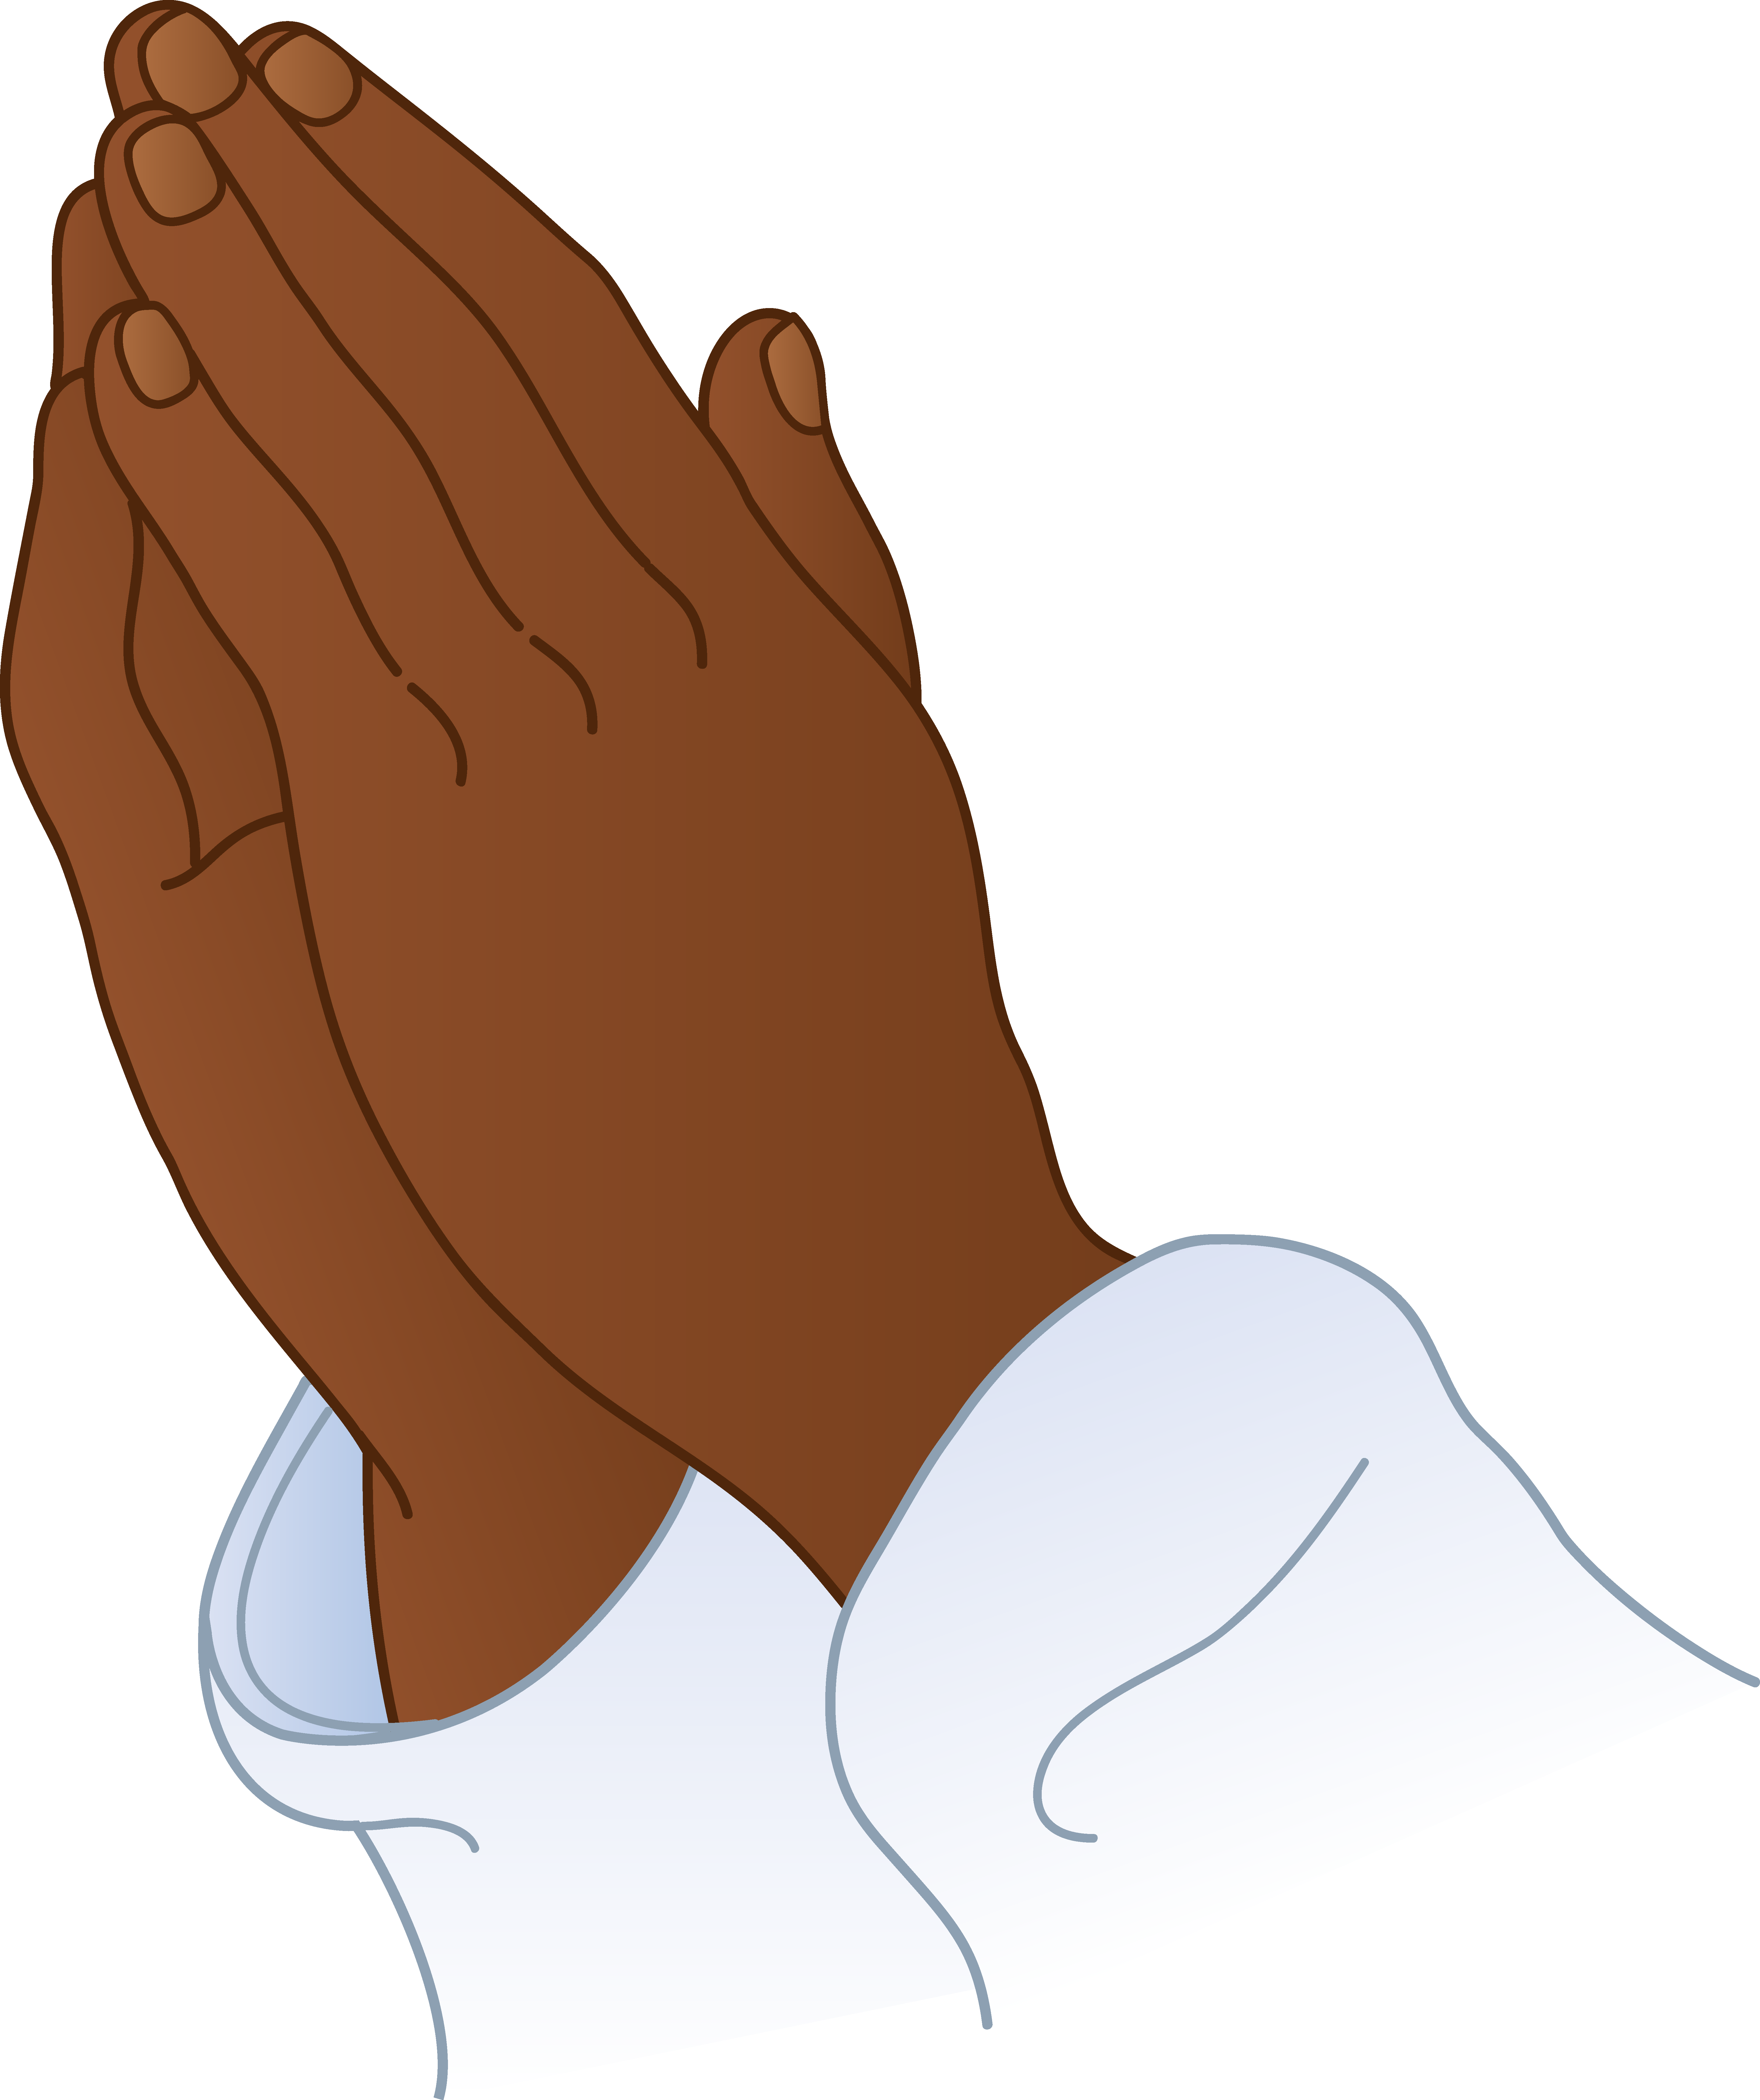 praying-hands-images-free-cliparts-co